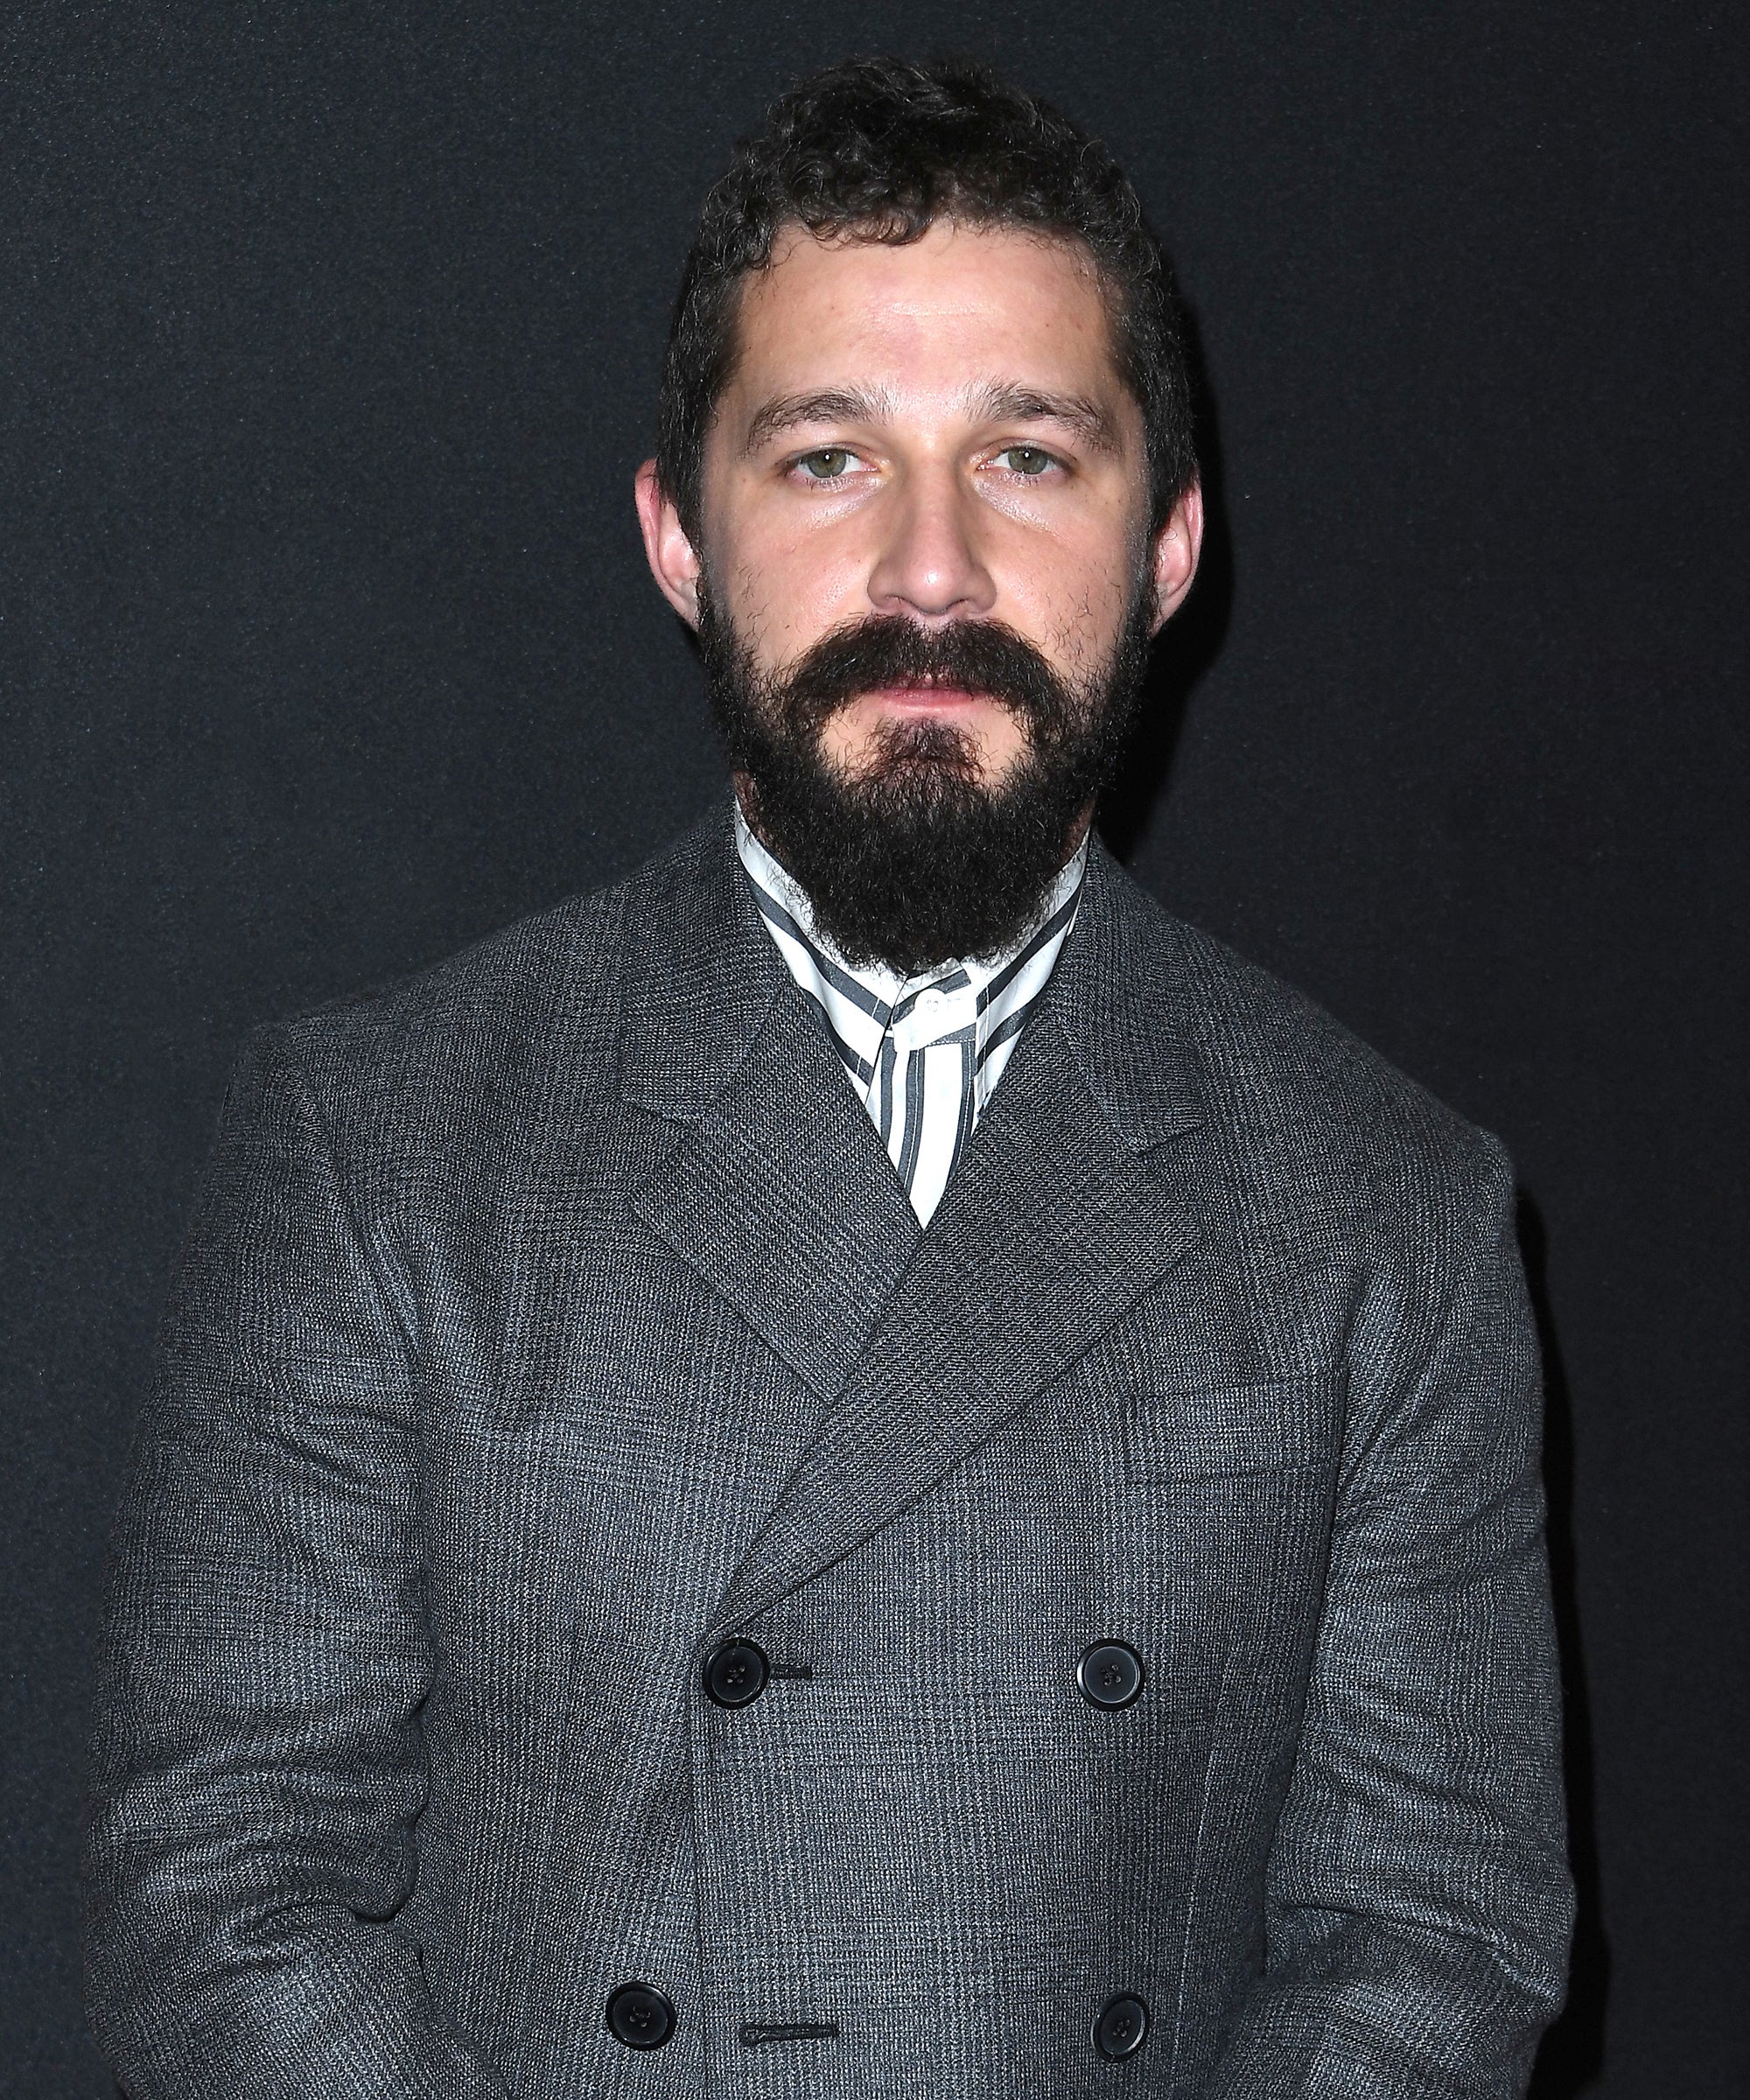 Shia LaBeouf is erased from promo material for Netflix's Pieces of a Woman  after FKA abuse claims